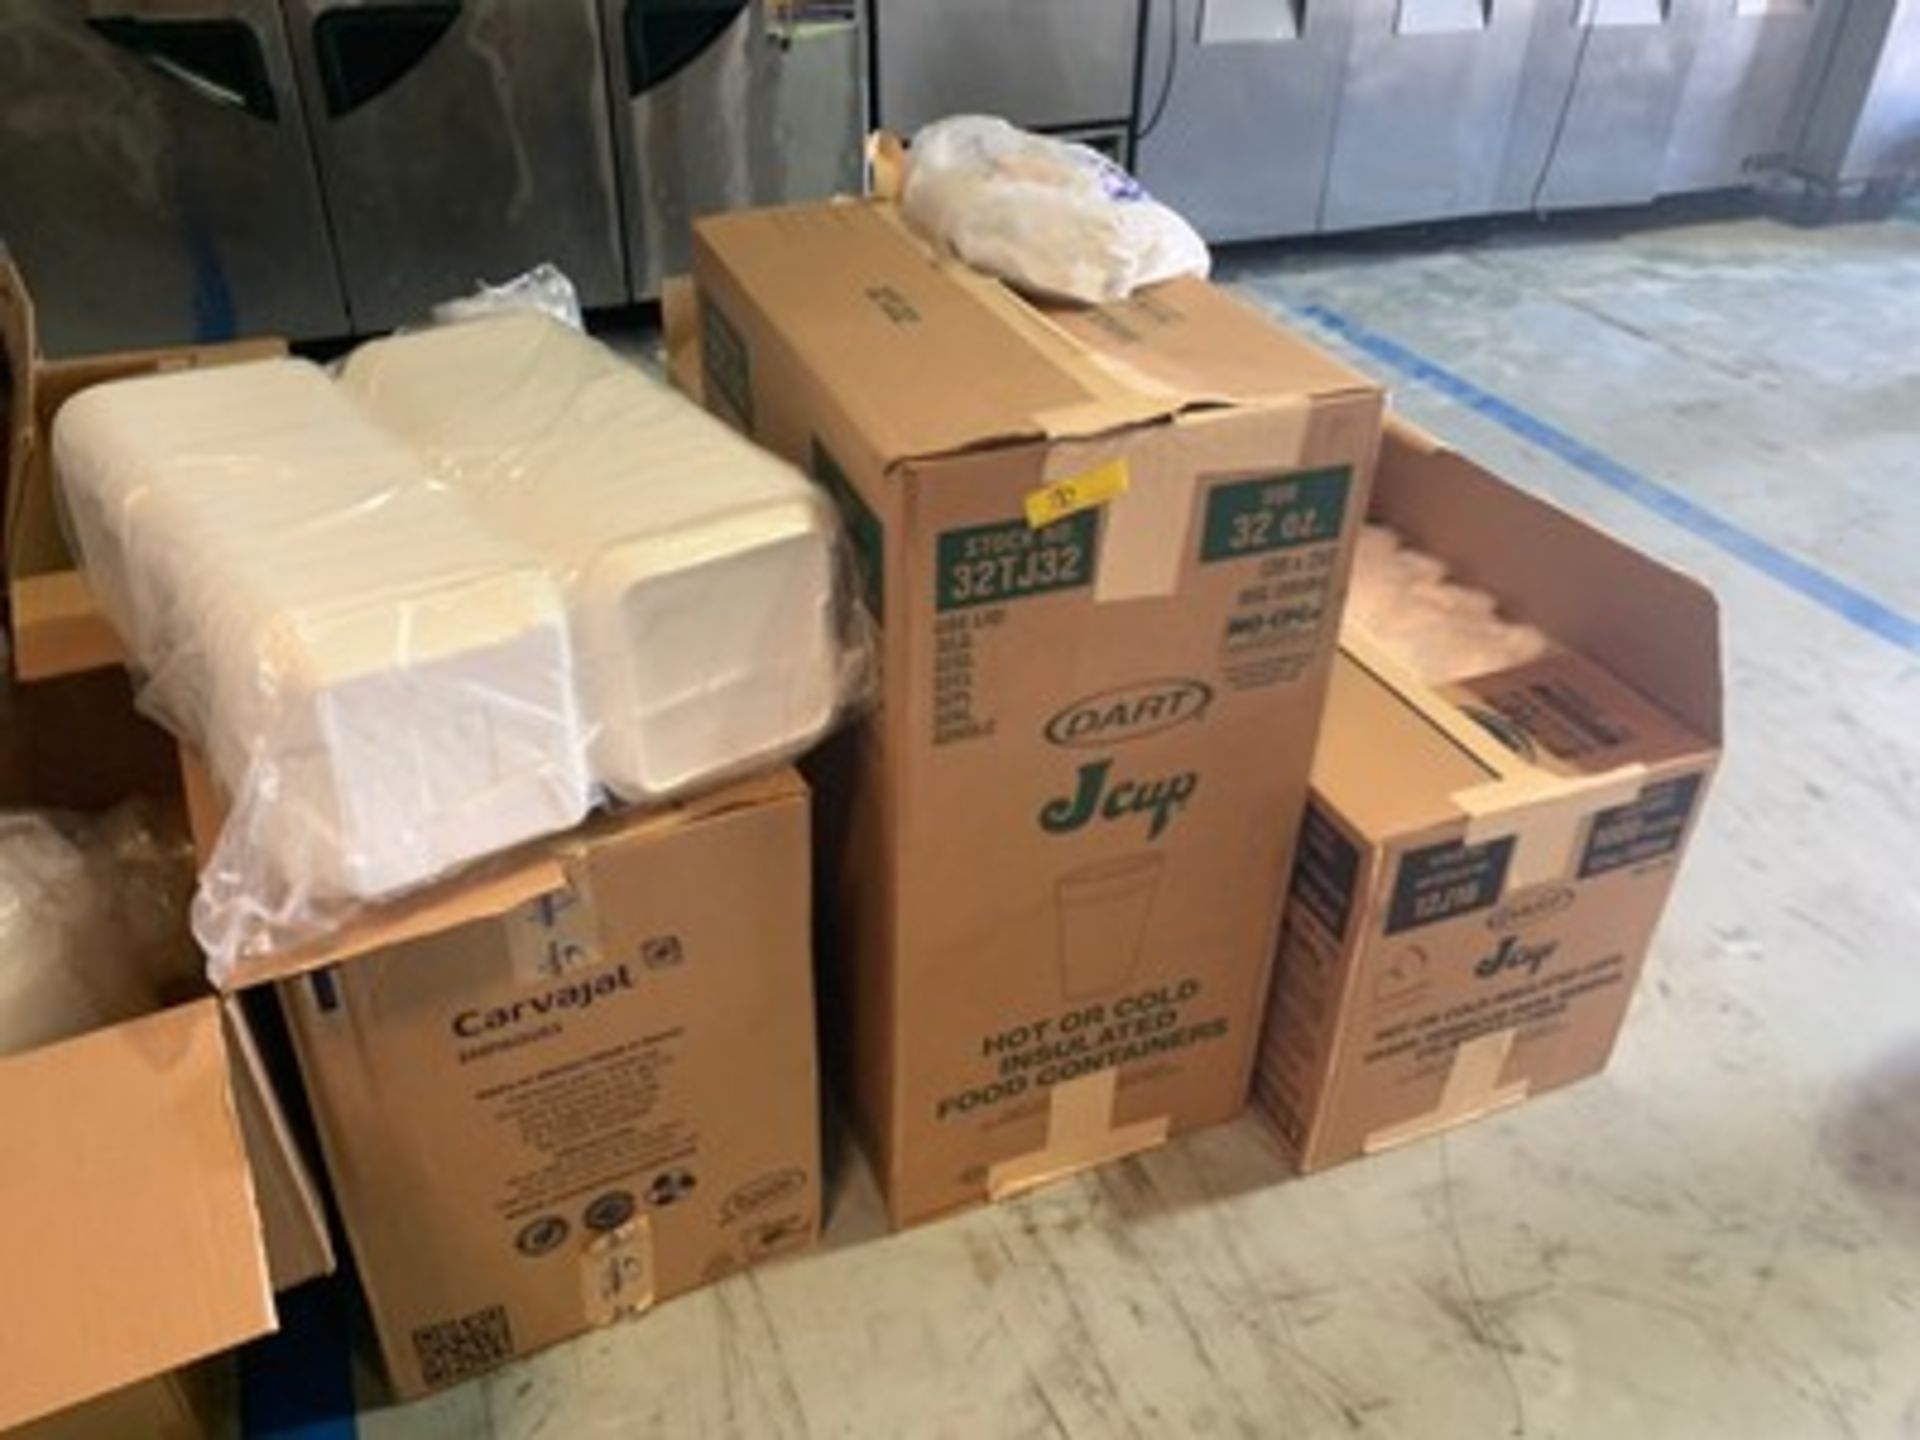 LOT STYROFOAM CUPS, PLASTIC CONTAINERS, FOLDING TO GO BOXES, PLASTIC BAGS, ETC - Image 2 of 3